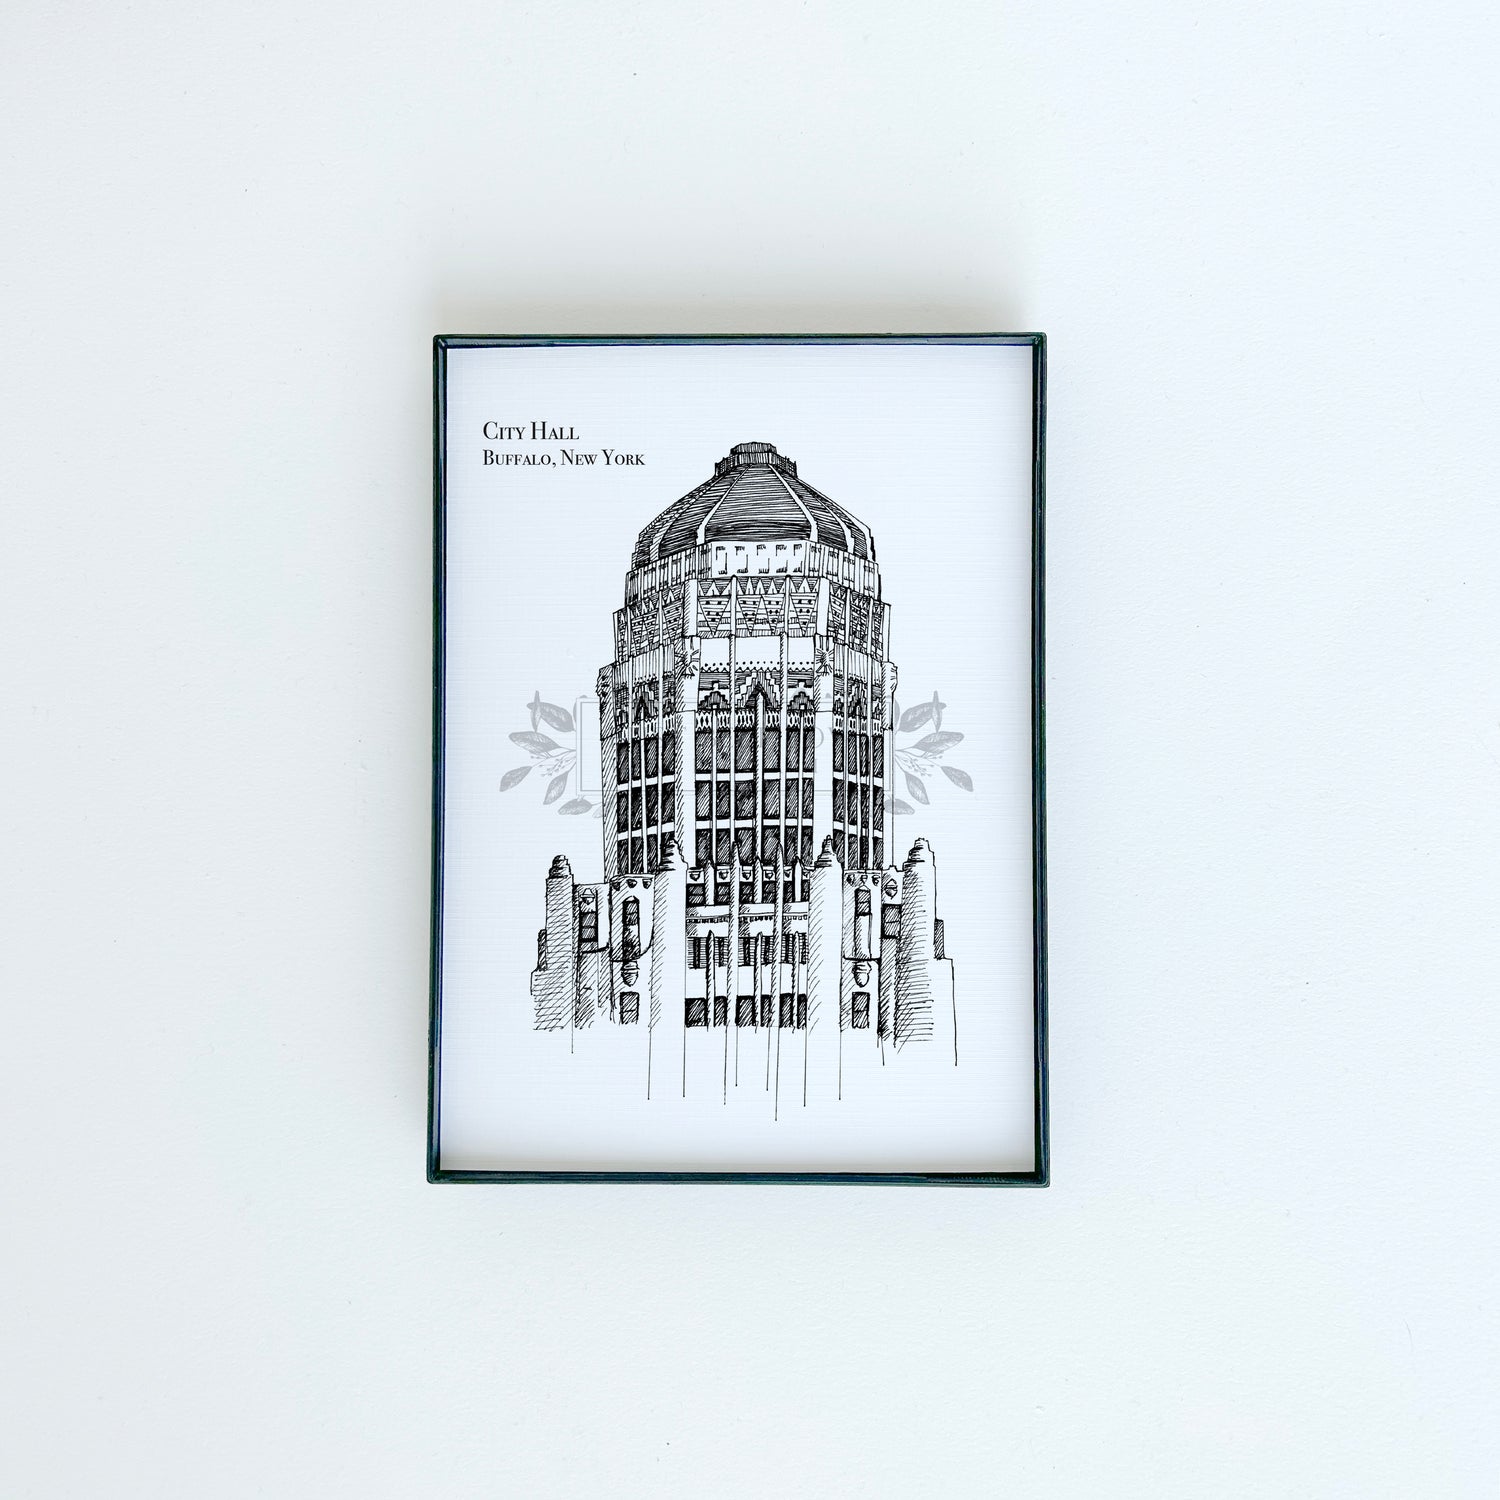 City Hall illustration in black ink on white paper by Rust Belt Love